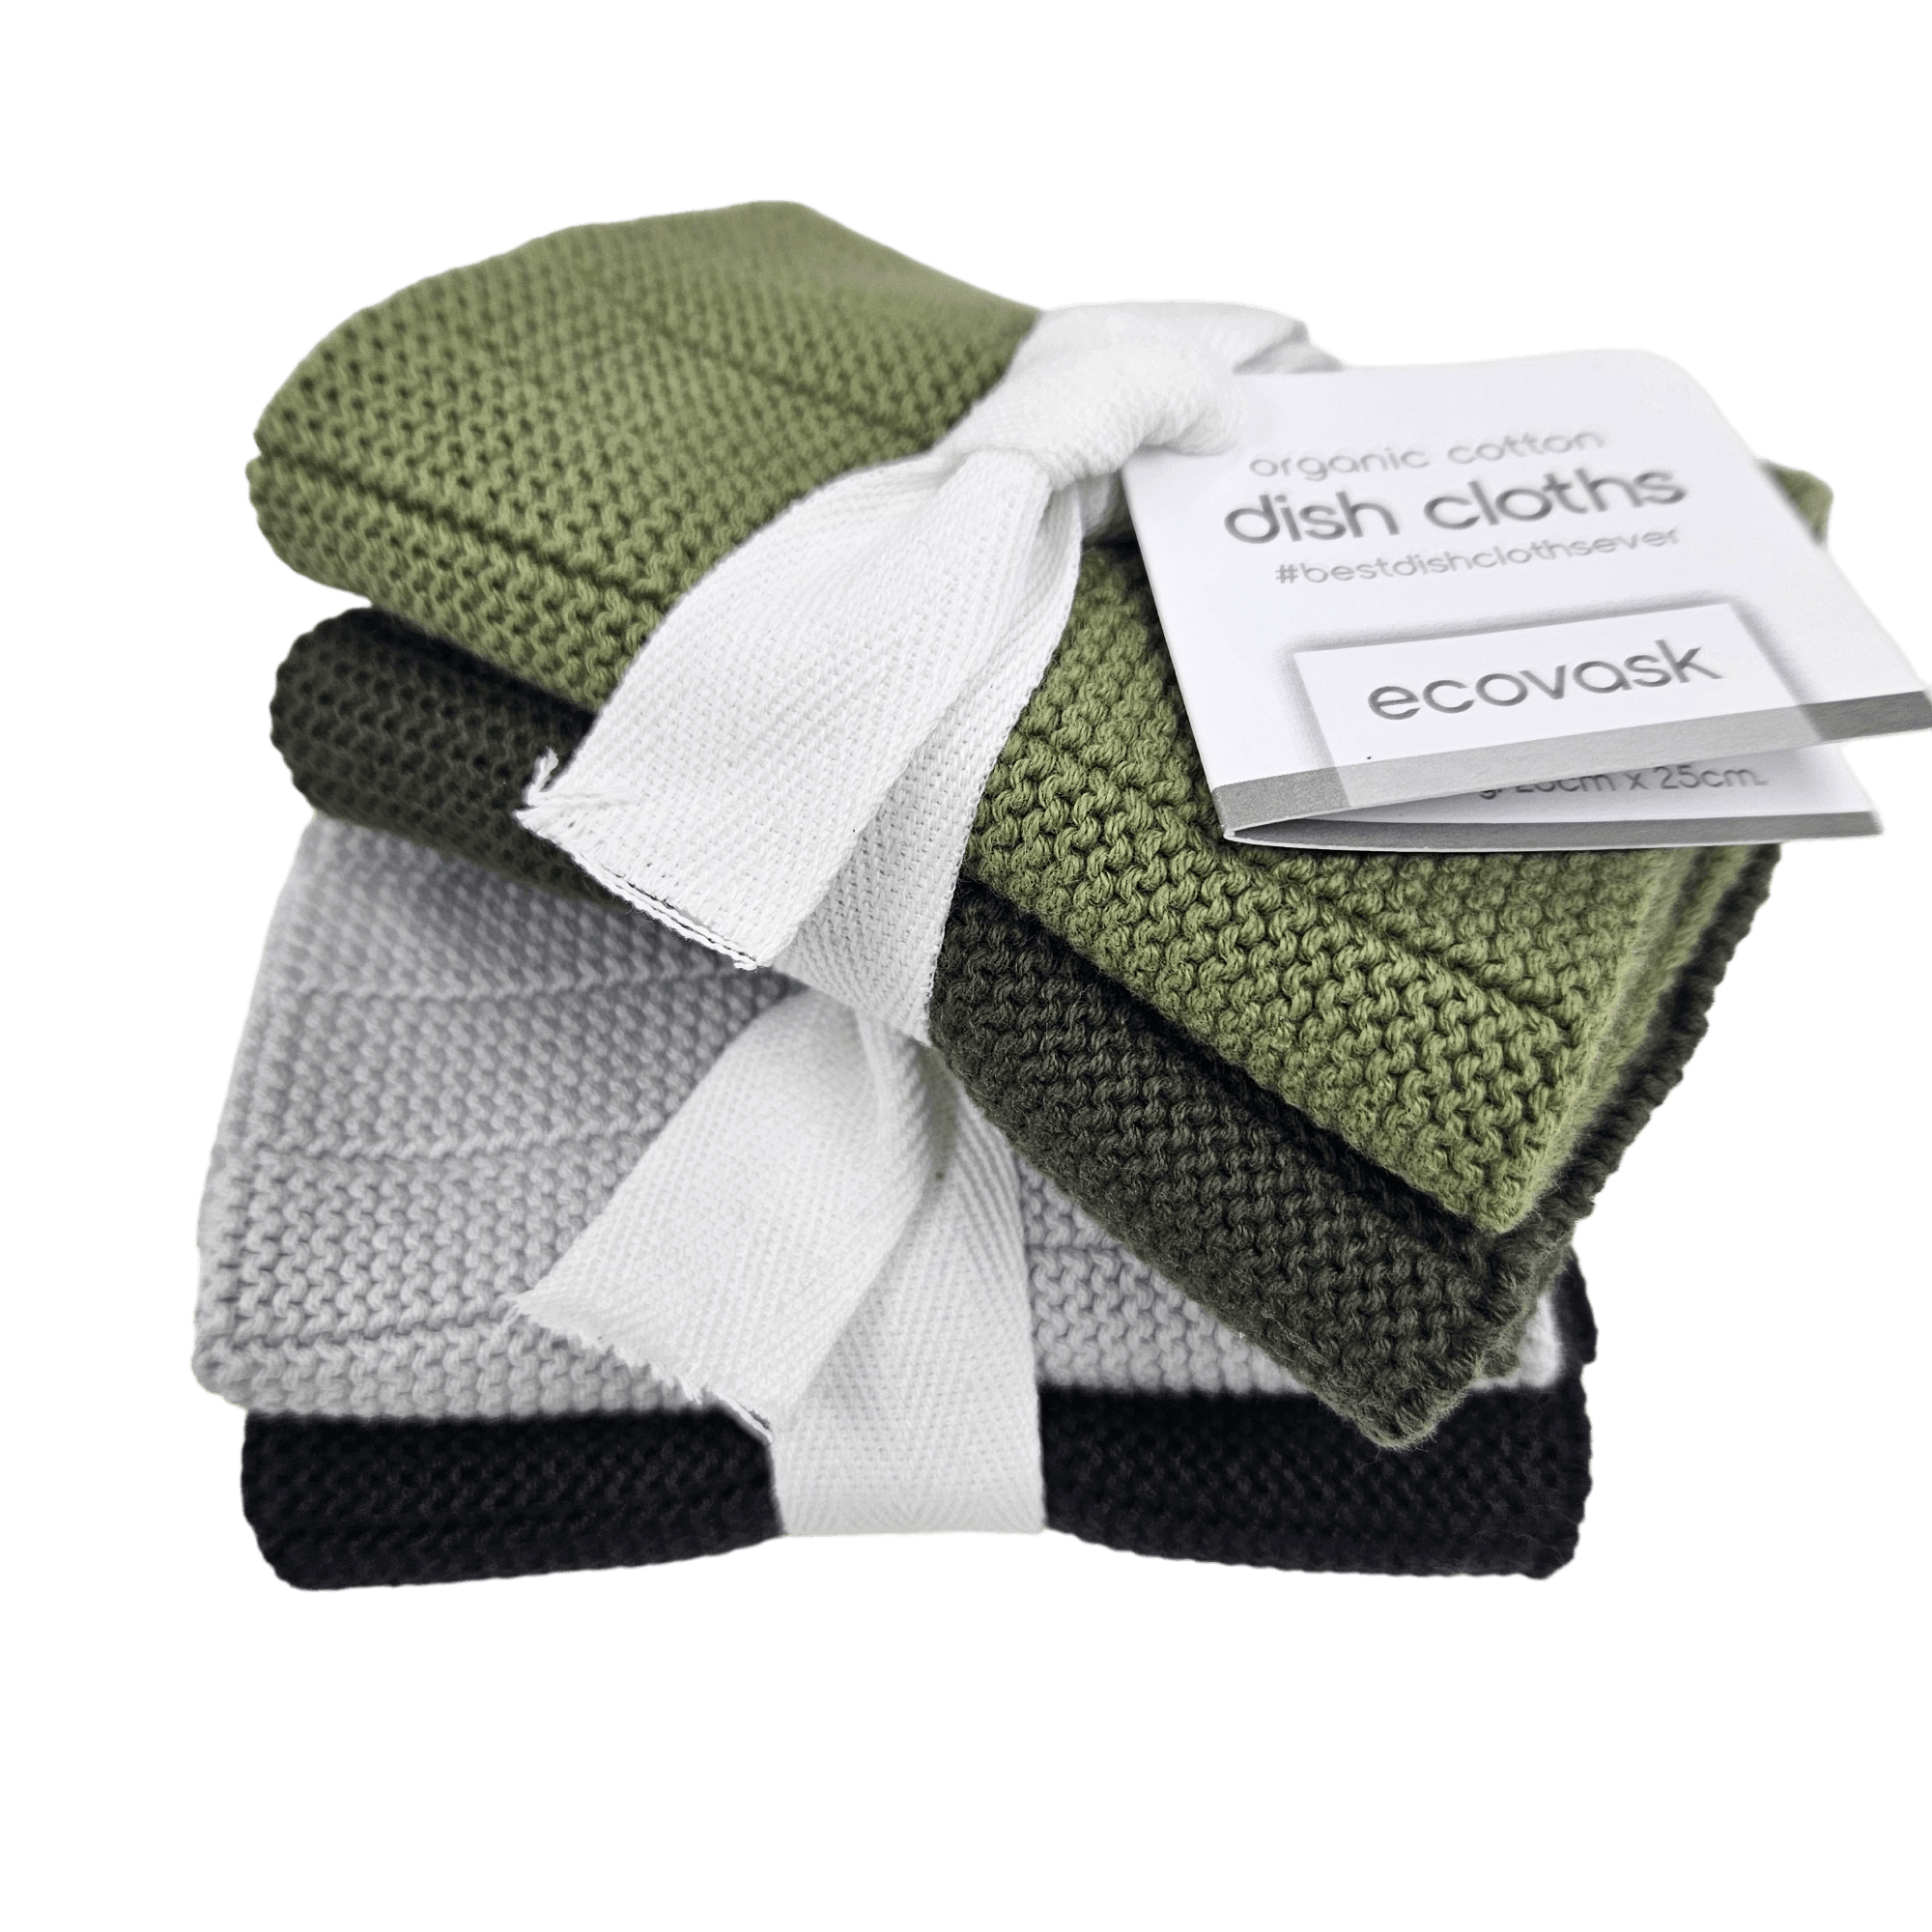 Ecovask Dish cloths 2pk (2 colour combos to choose from) - Beautiful Gifts - Packaged with Love